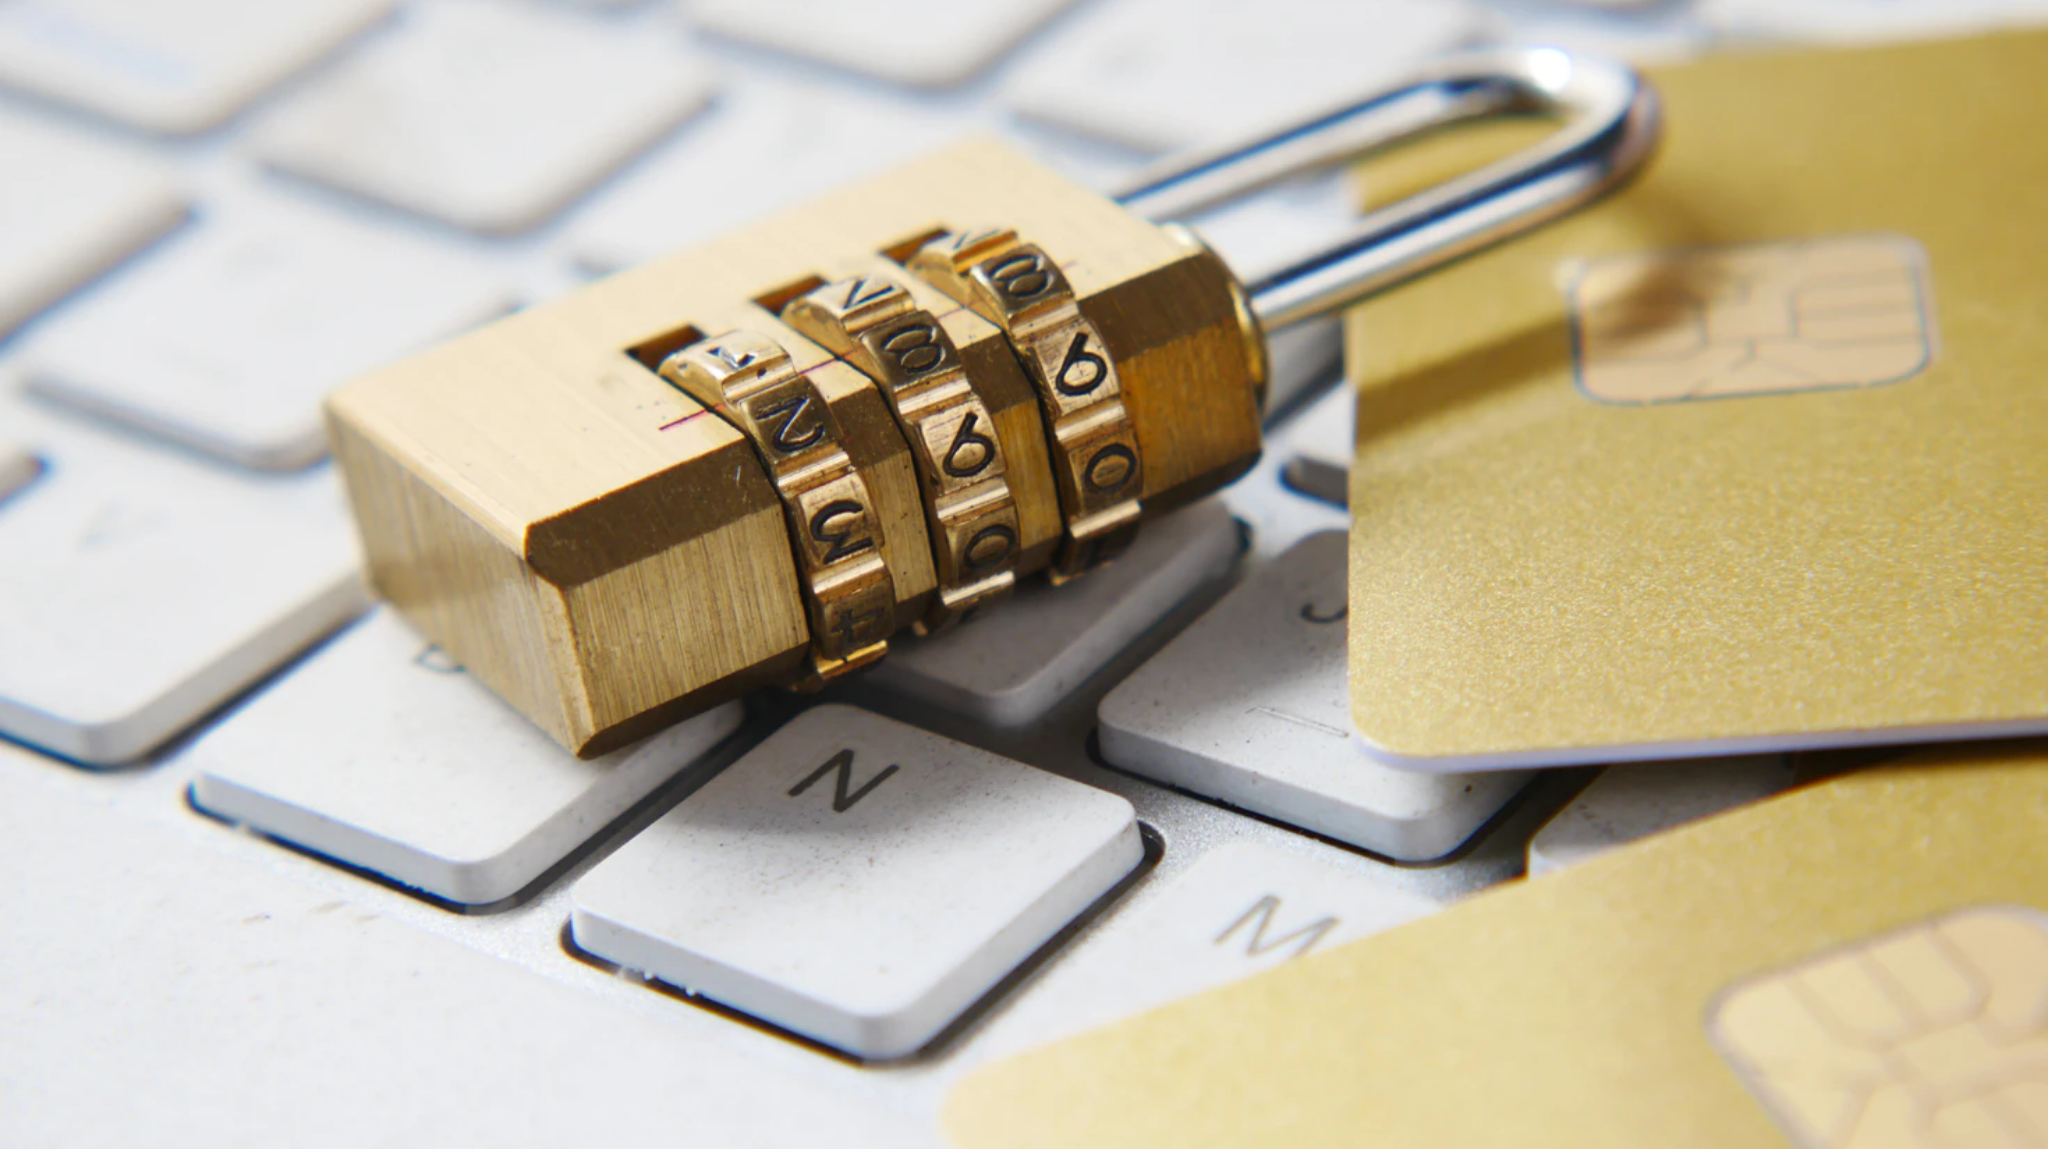 8 Features To Look For When Choosing An Email Encryption Solution